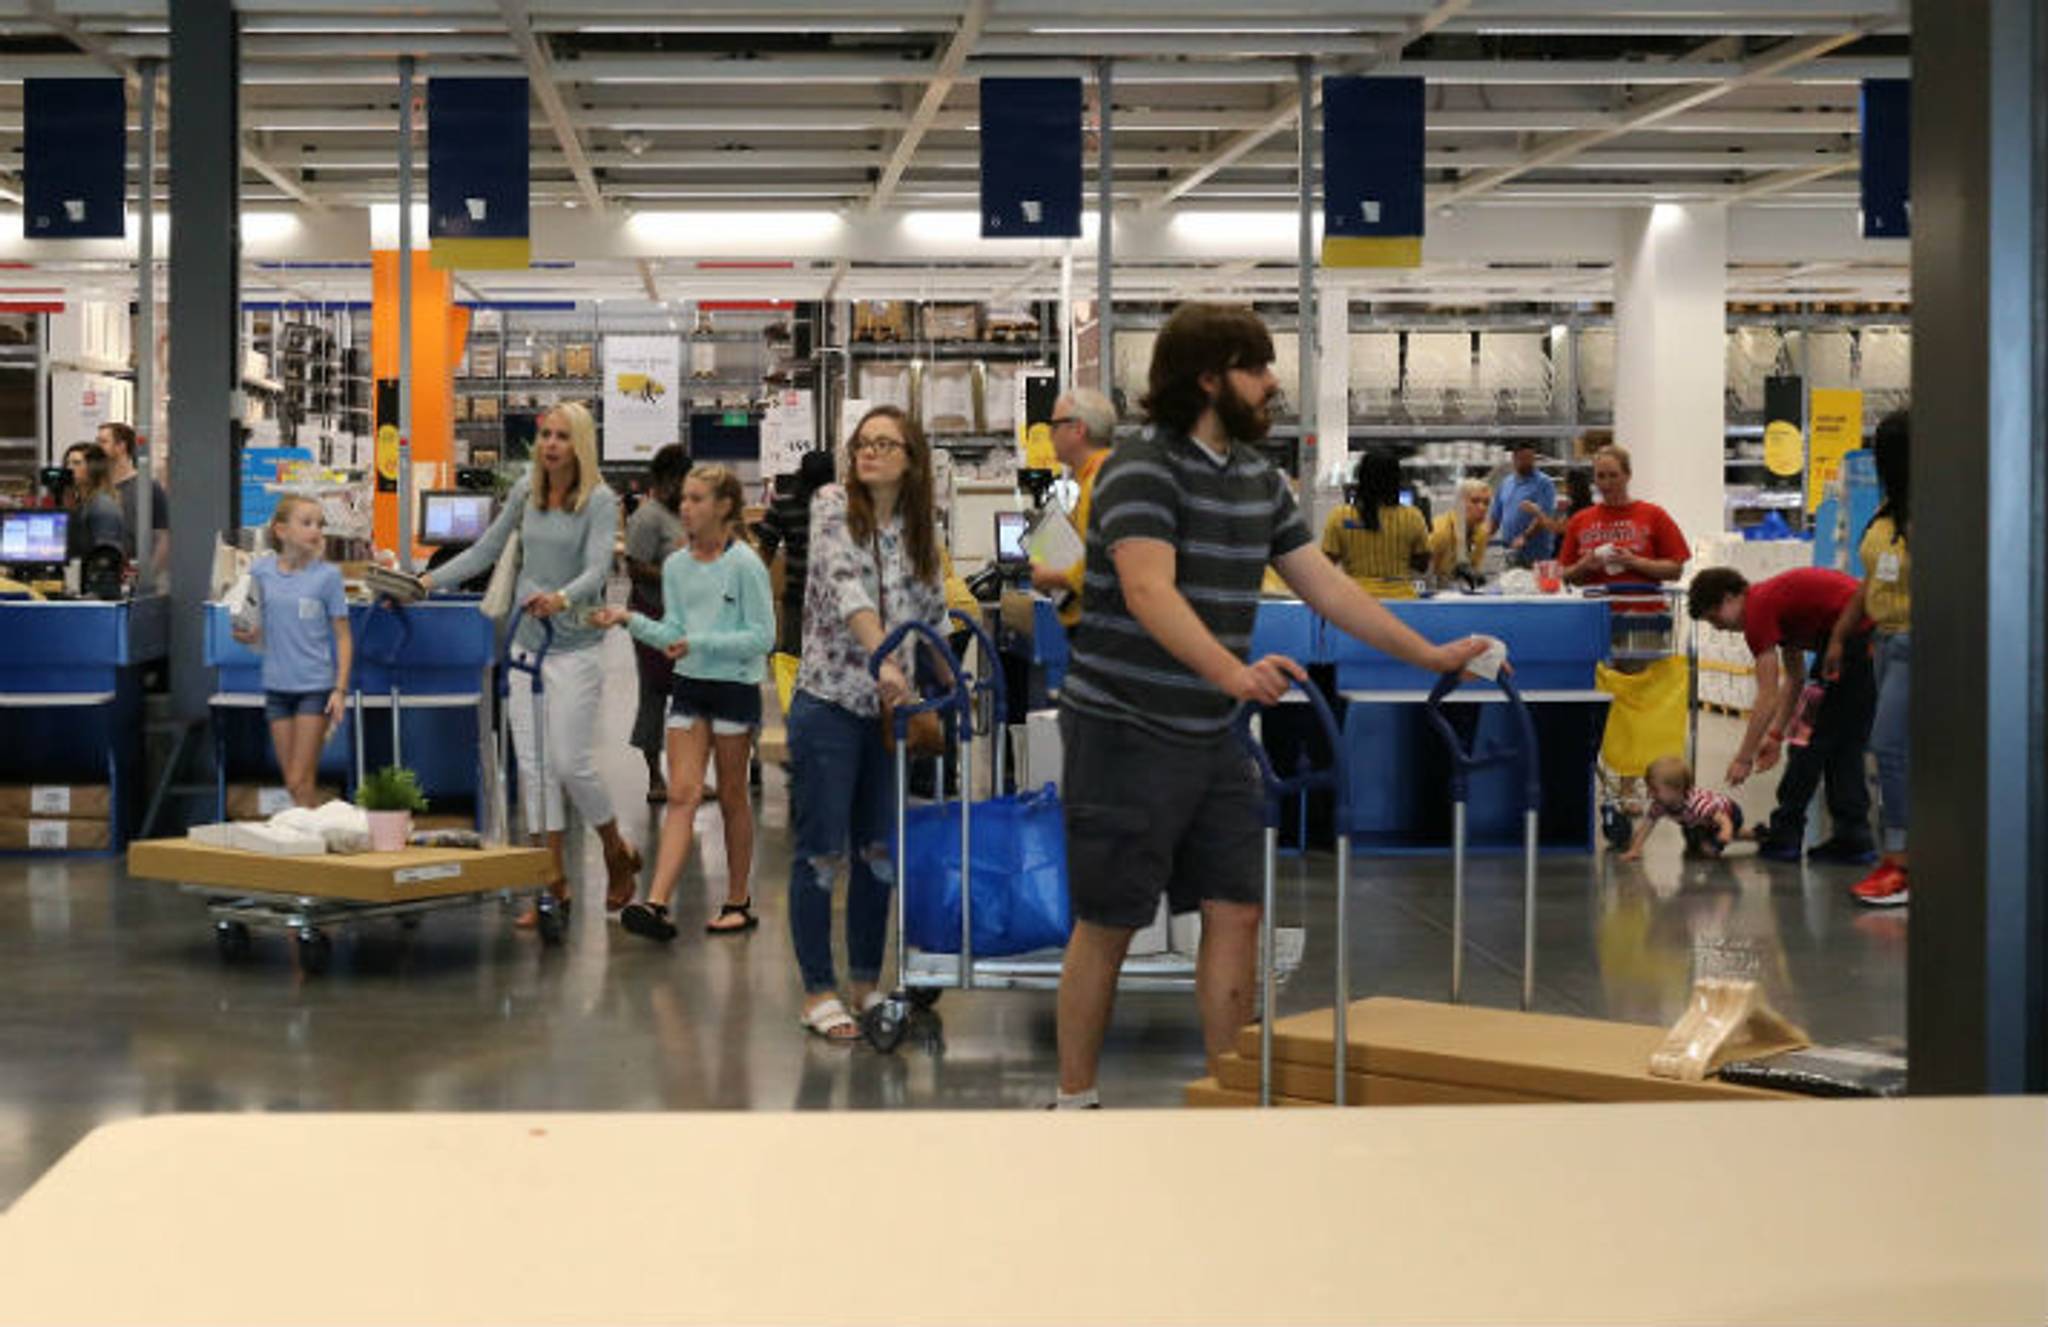 IKEA's sustainable store plays to eco-shoppers' needs